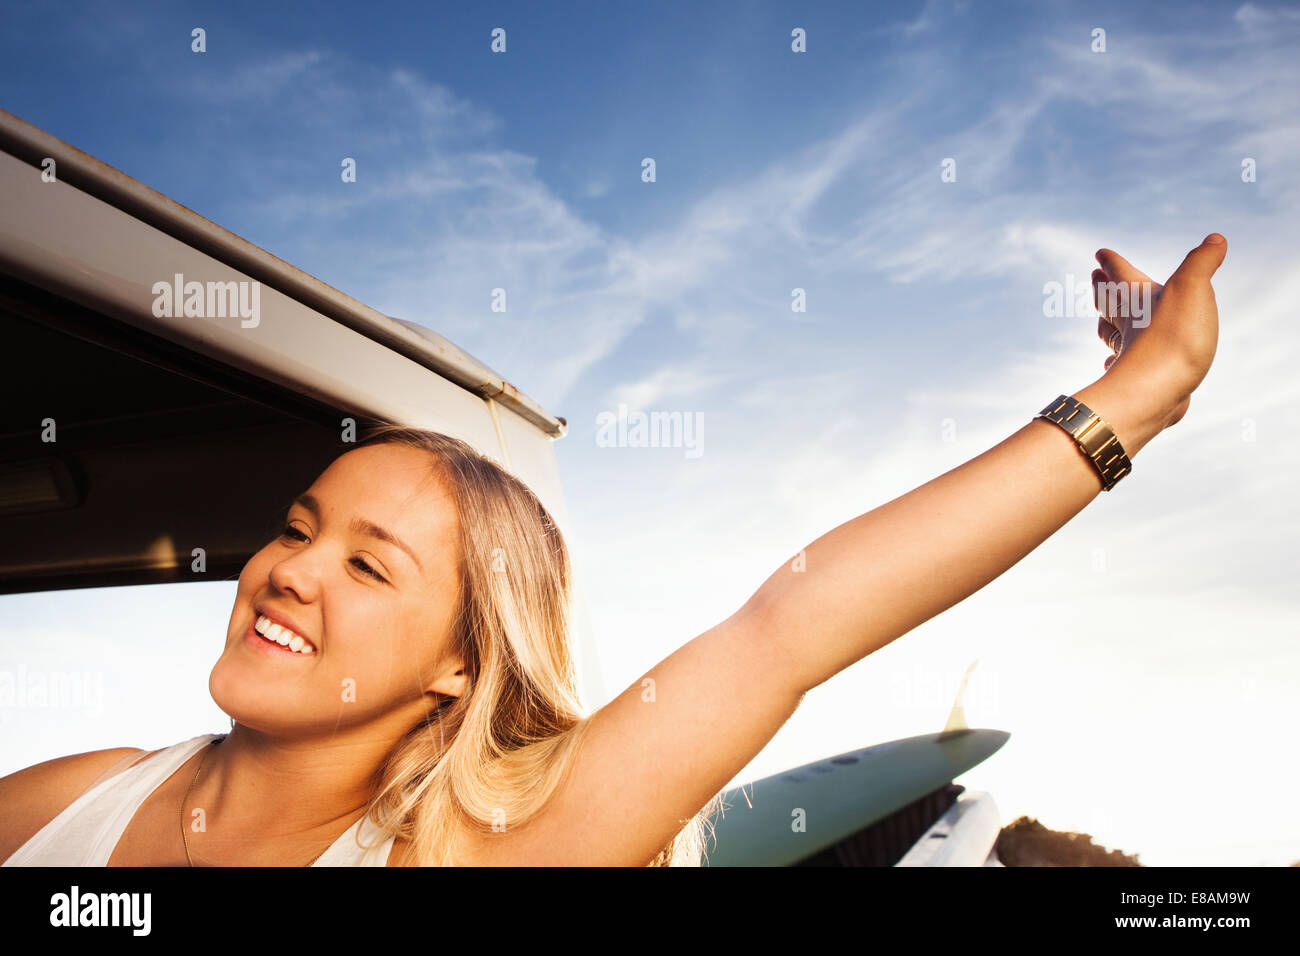 Young female surfer stretching next to pickup truck Stock Photo